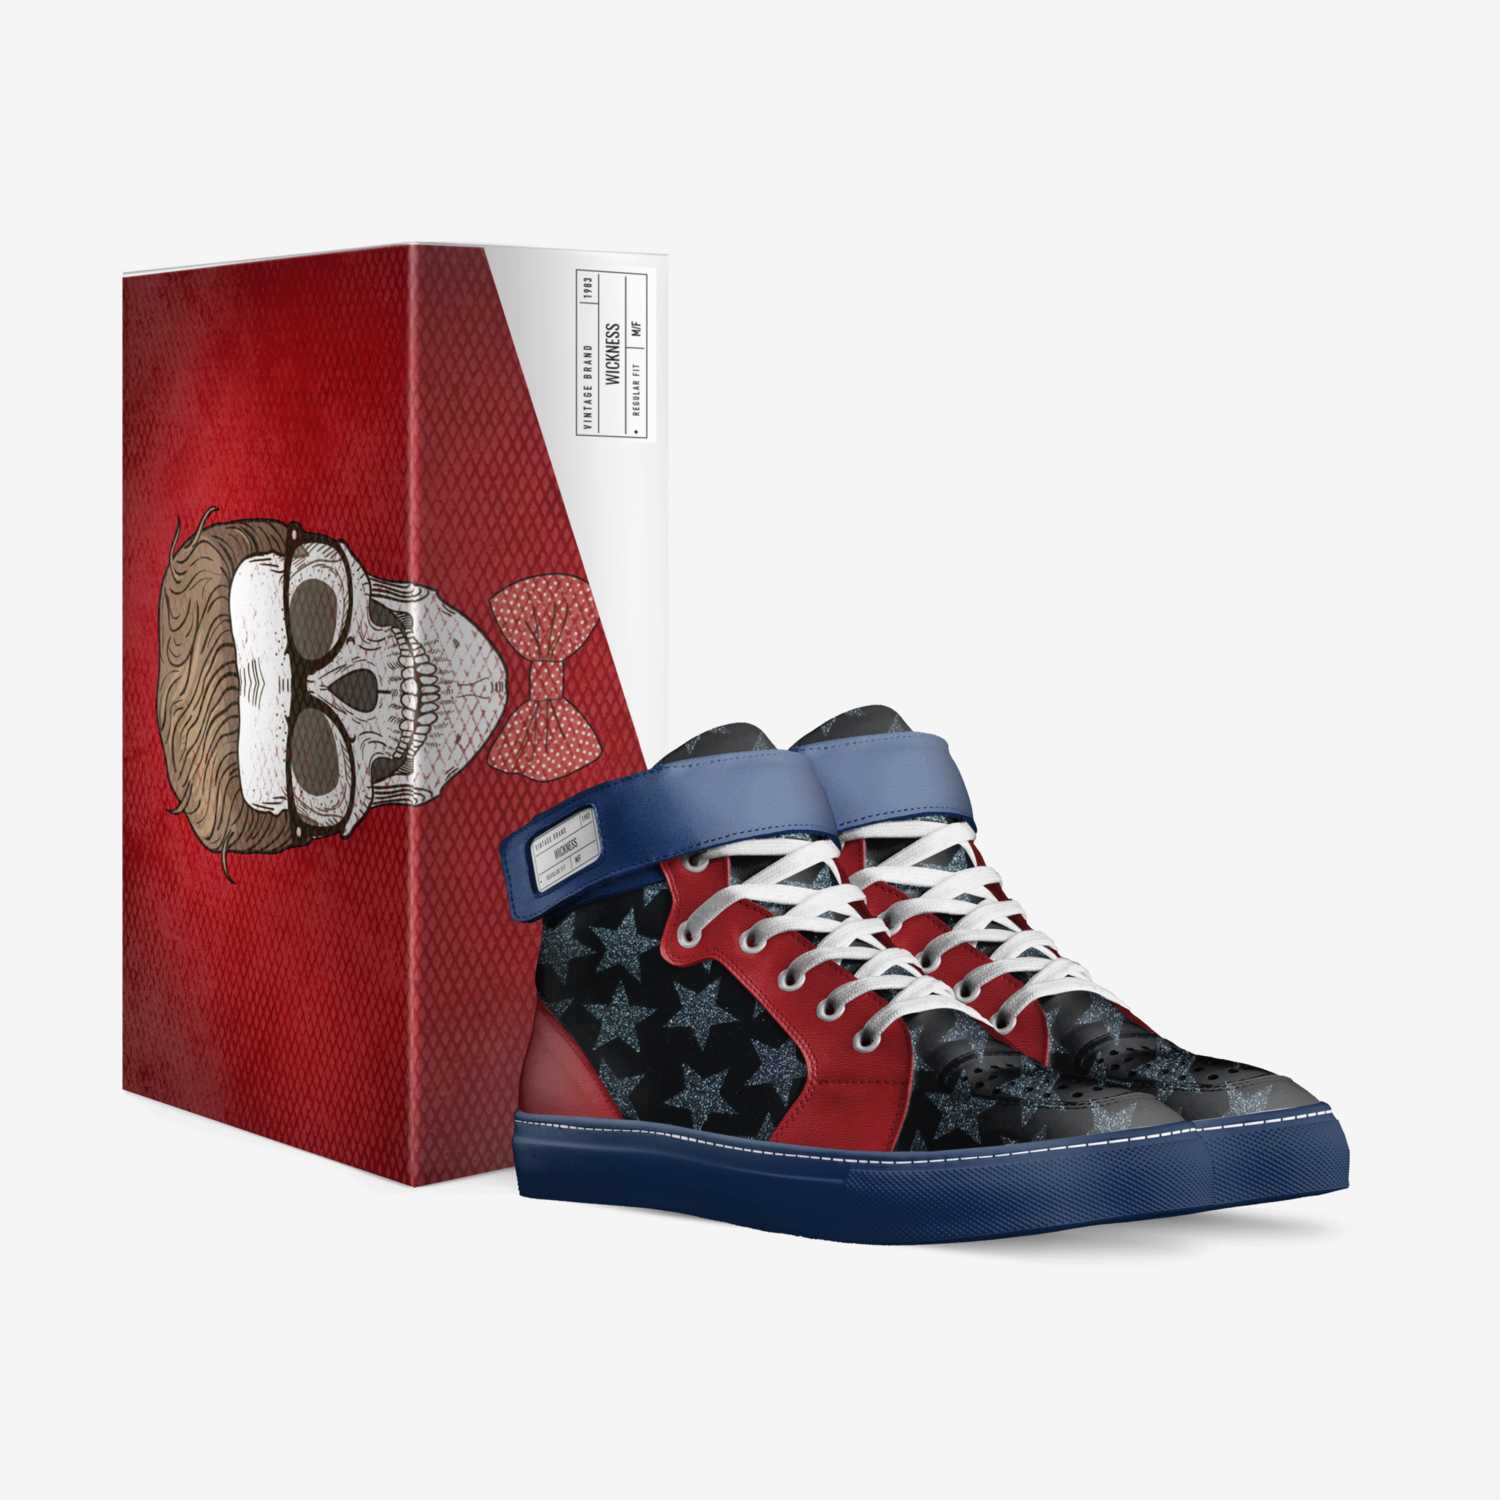 Wickness custom made in Italy shoes by Ryan Fishwick | Box view